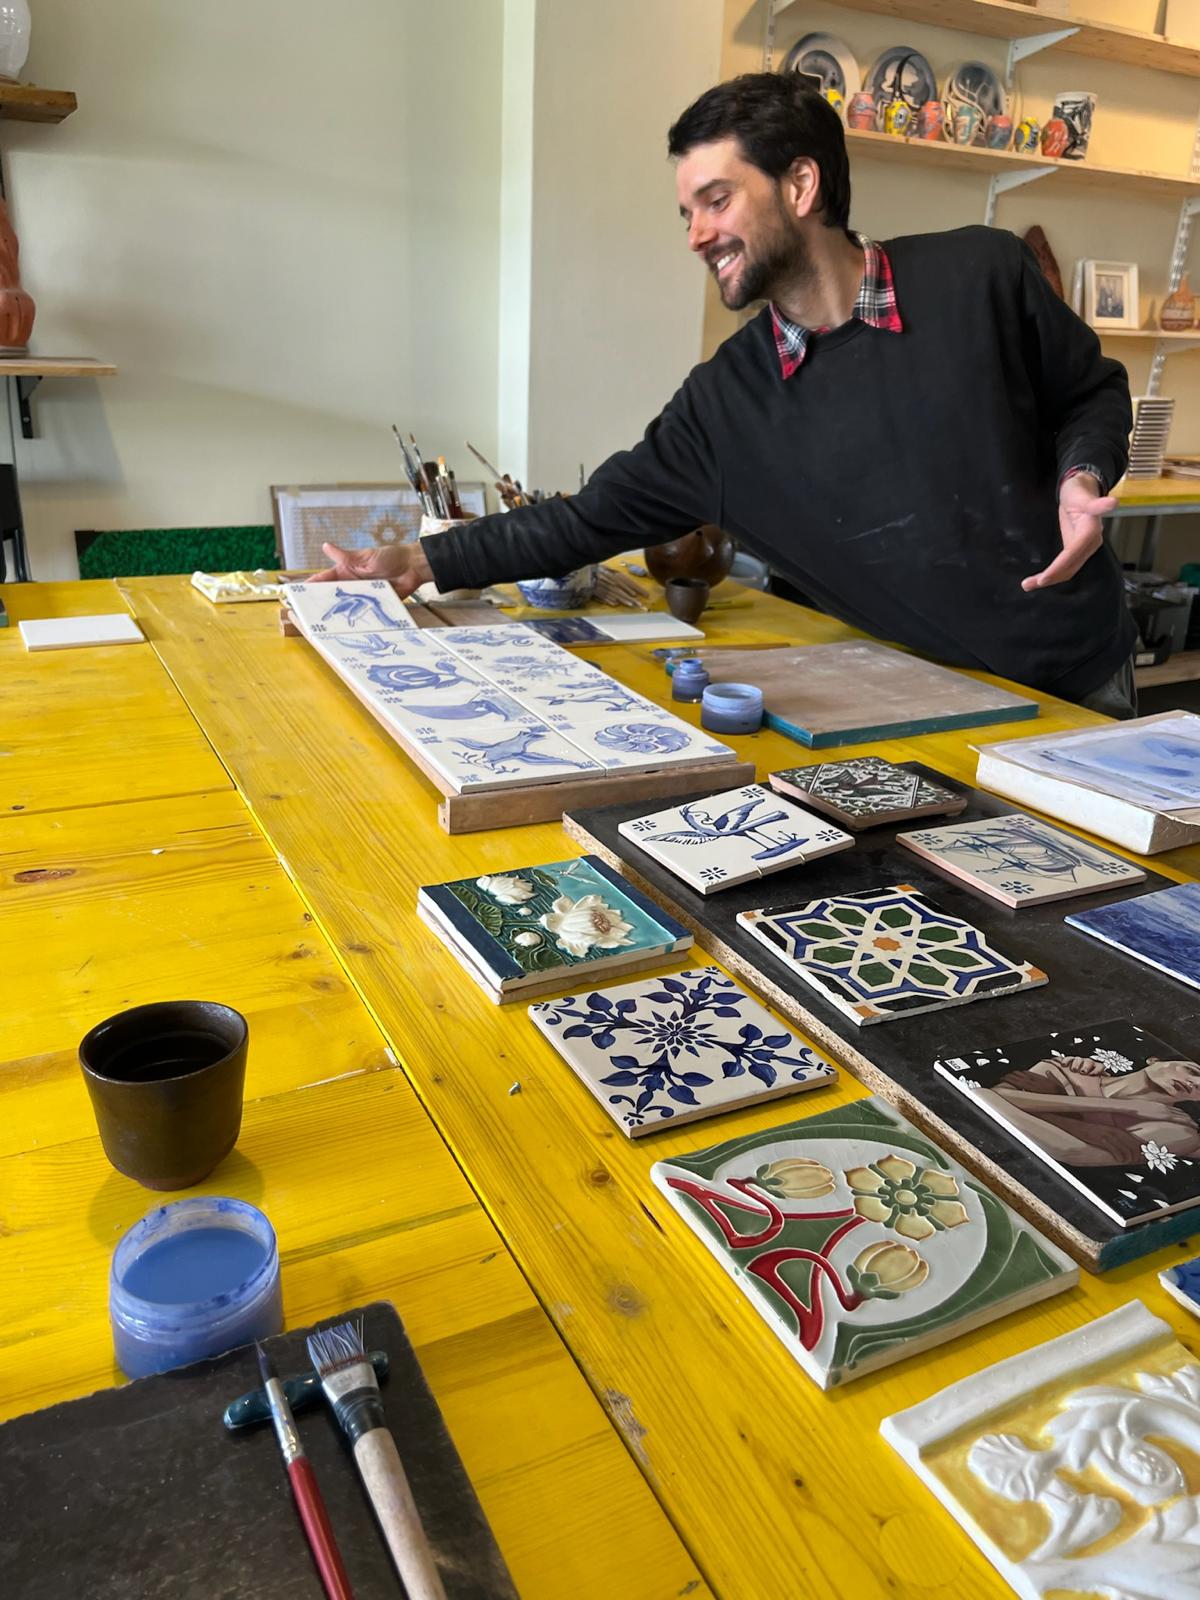 Tile Painting Workshop "Porto Tiles and Tea" with Francisco in Porto, Portugal by subcultours